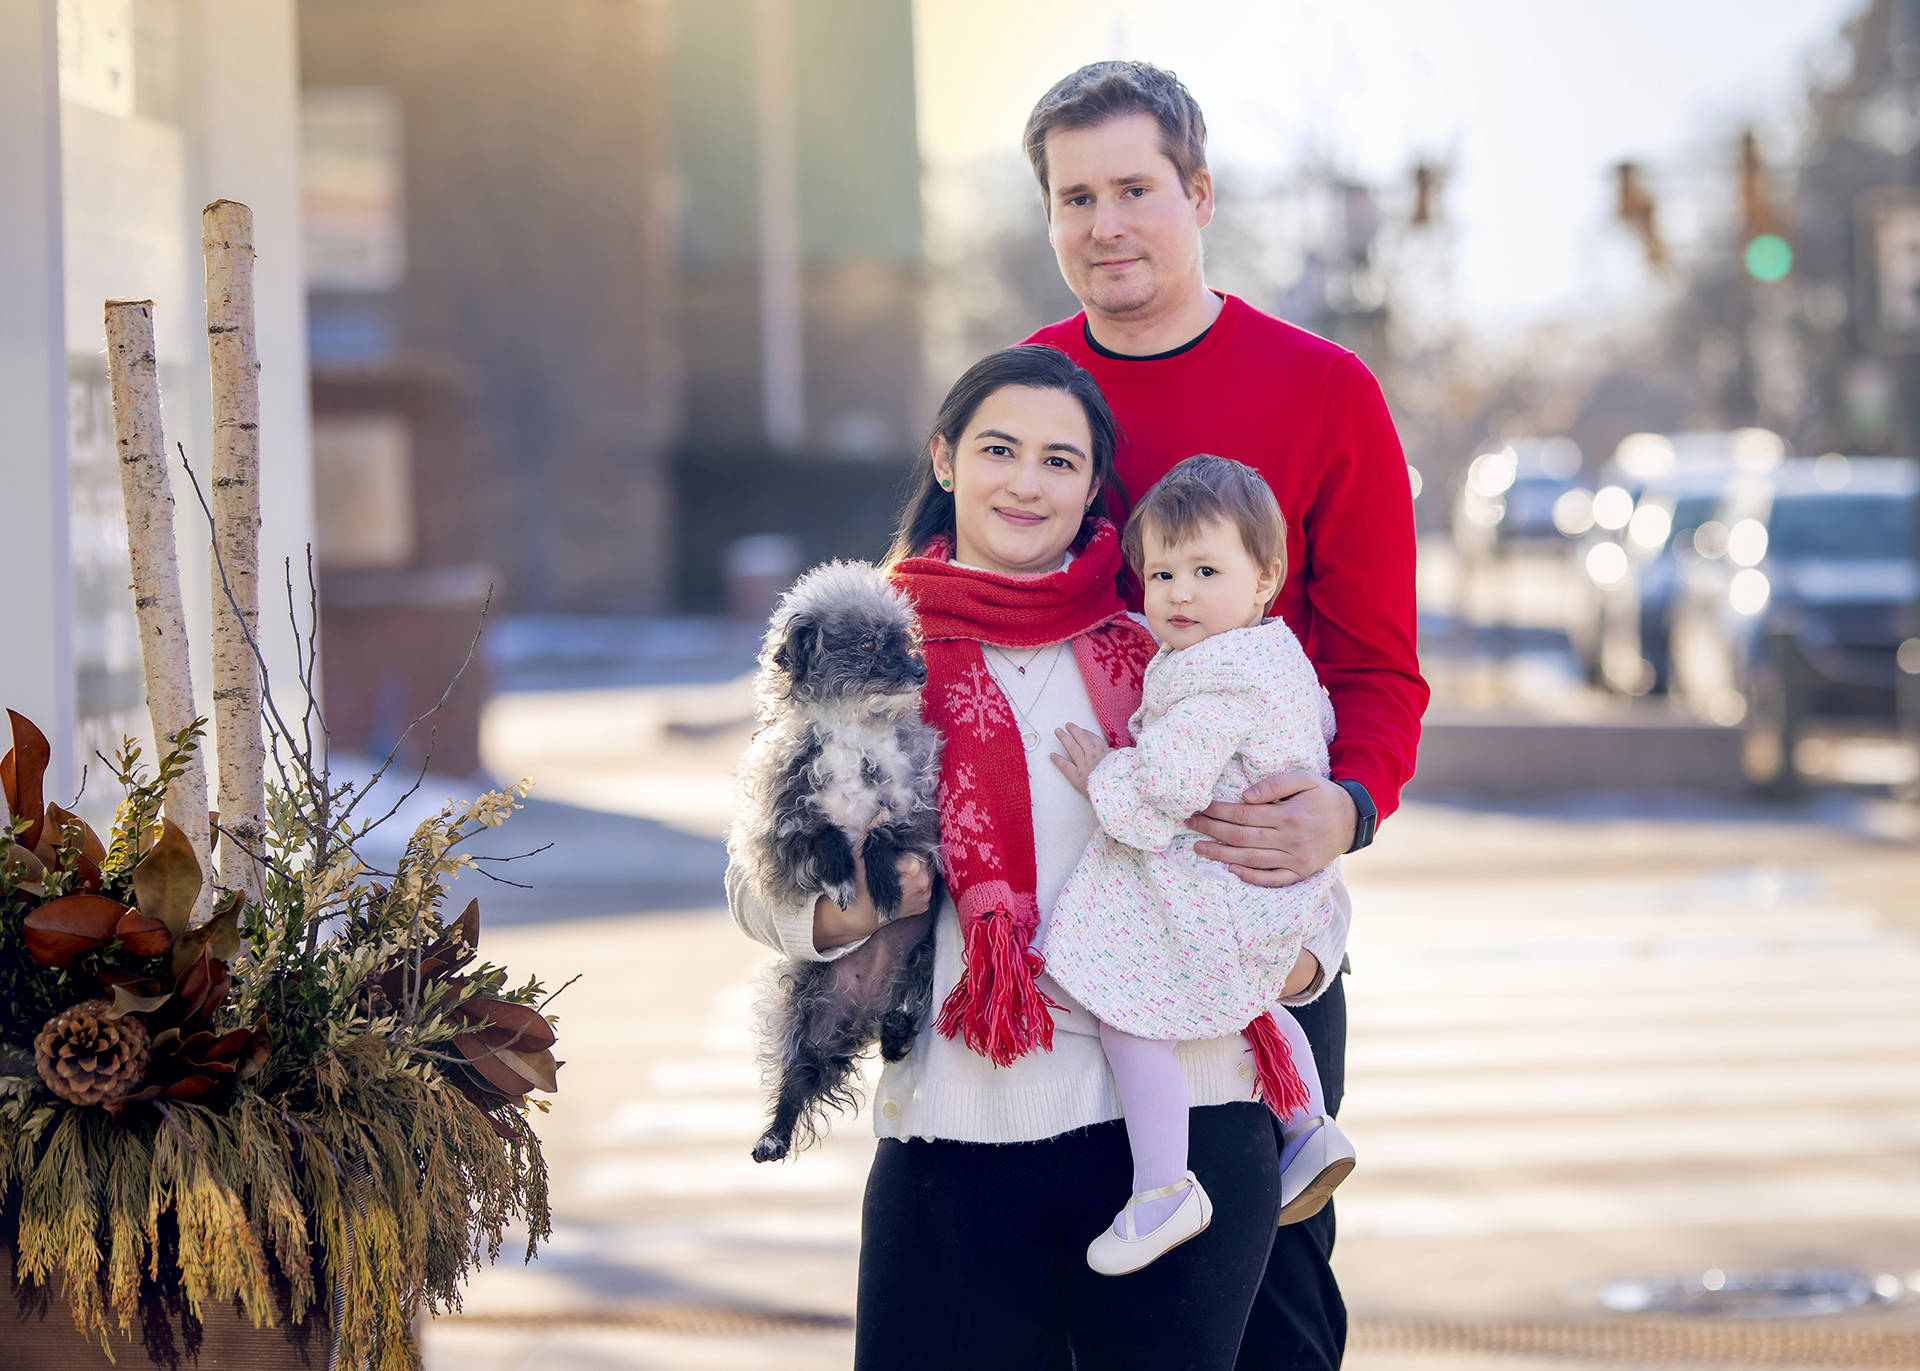 A Detroit holiday family photoshoot of a couple and their young baby as they each wear matching white and red outfits while in the city.